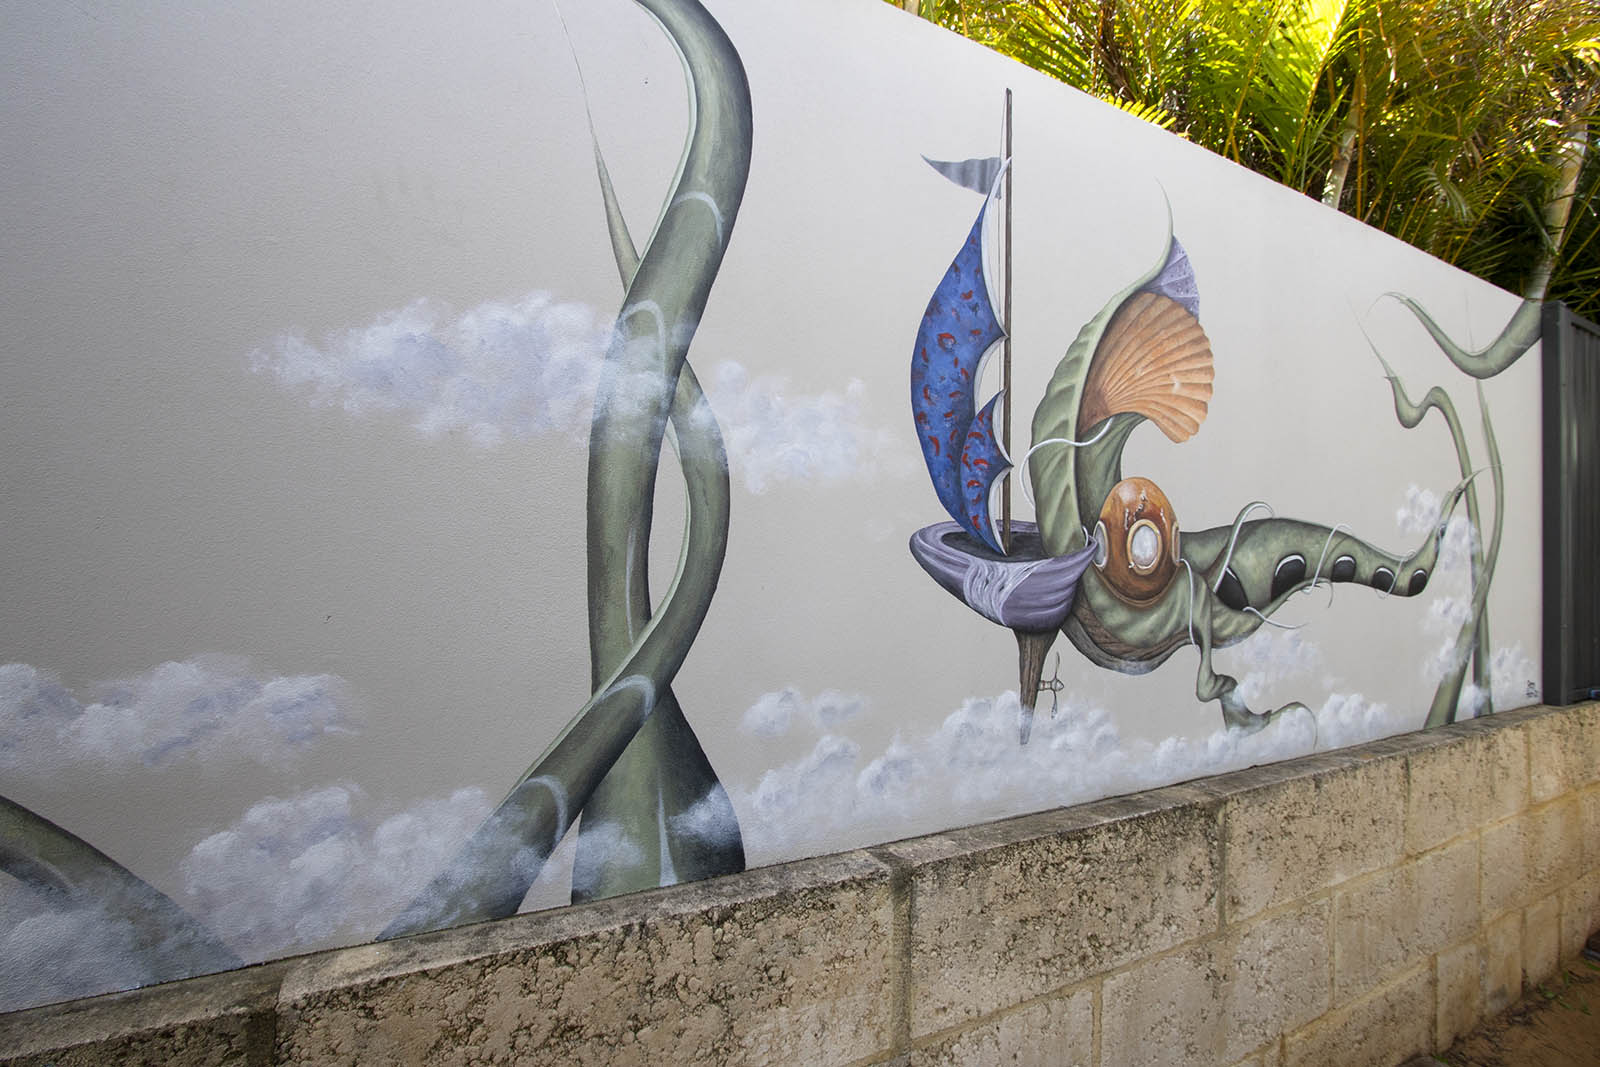 Outdoor mural of fantasy scene with diver's helment on green creature boat with sail